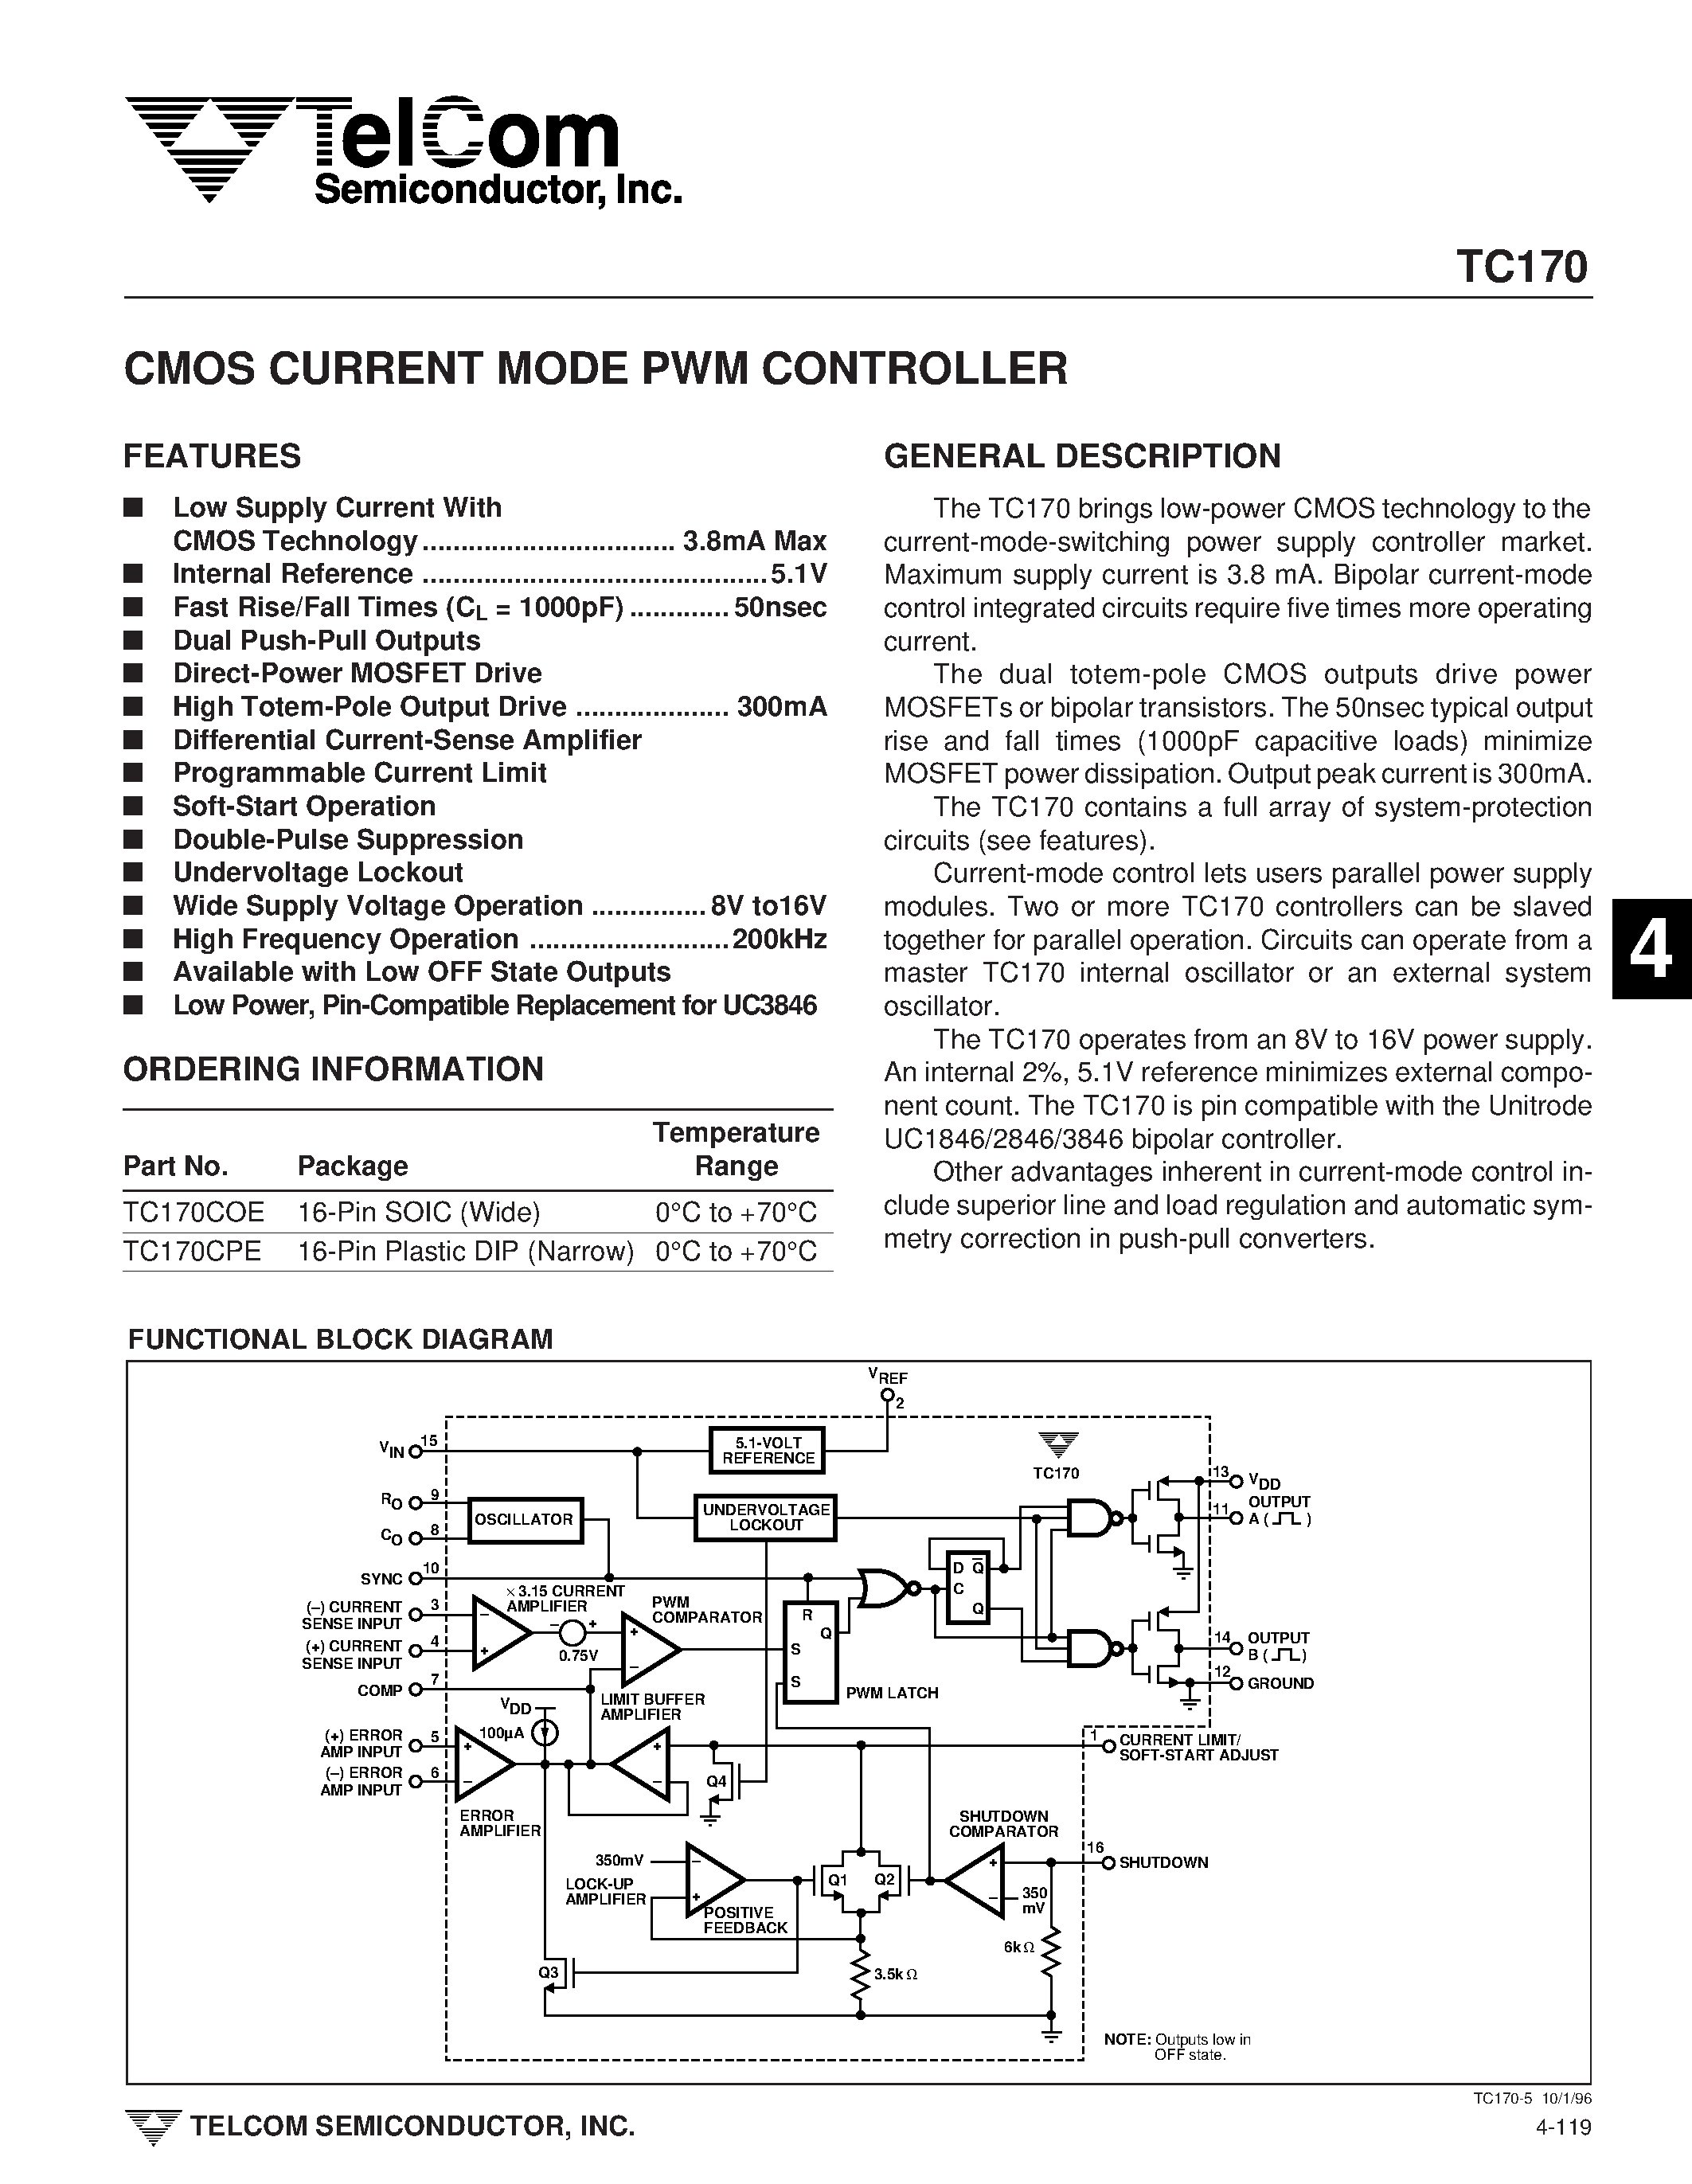 Datasheet TC170 - CMOS CURRENT MODE PWM CONTROLLER page 1